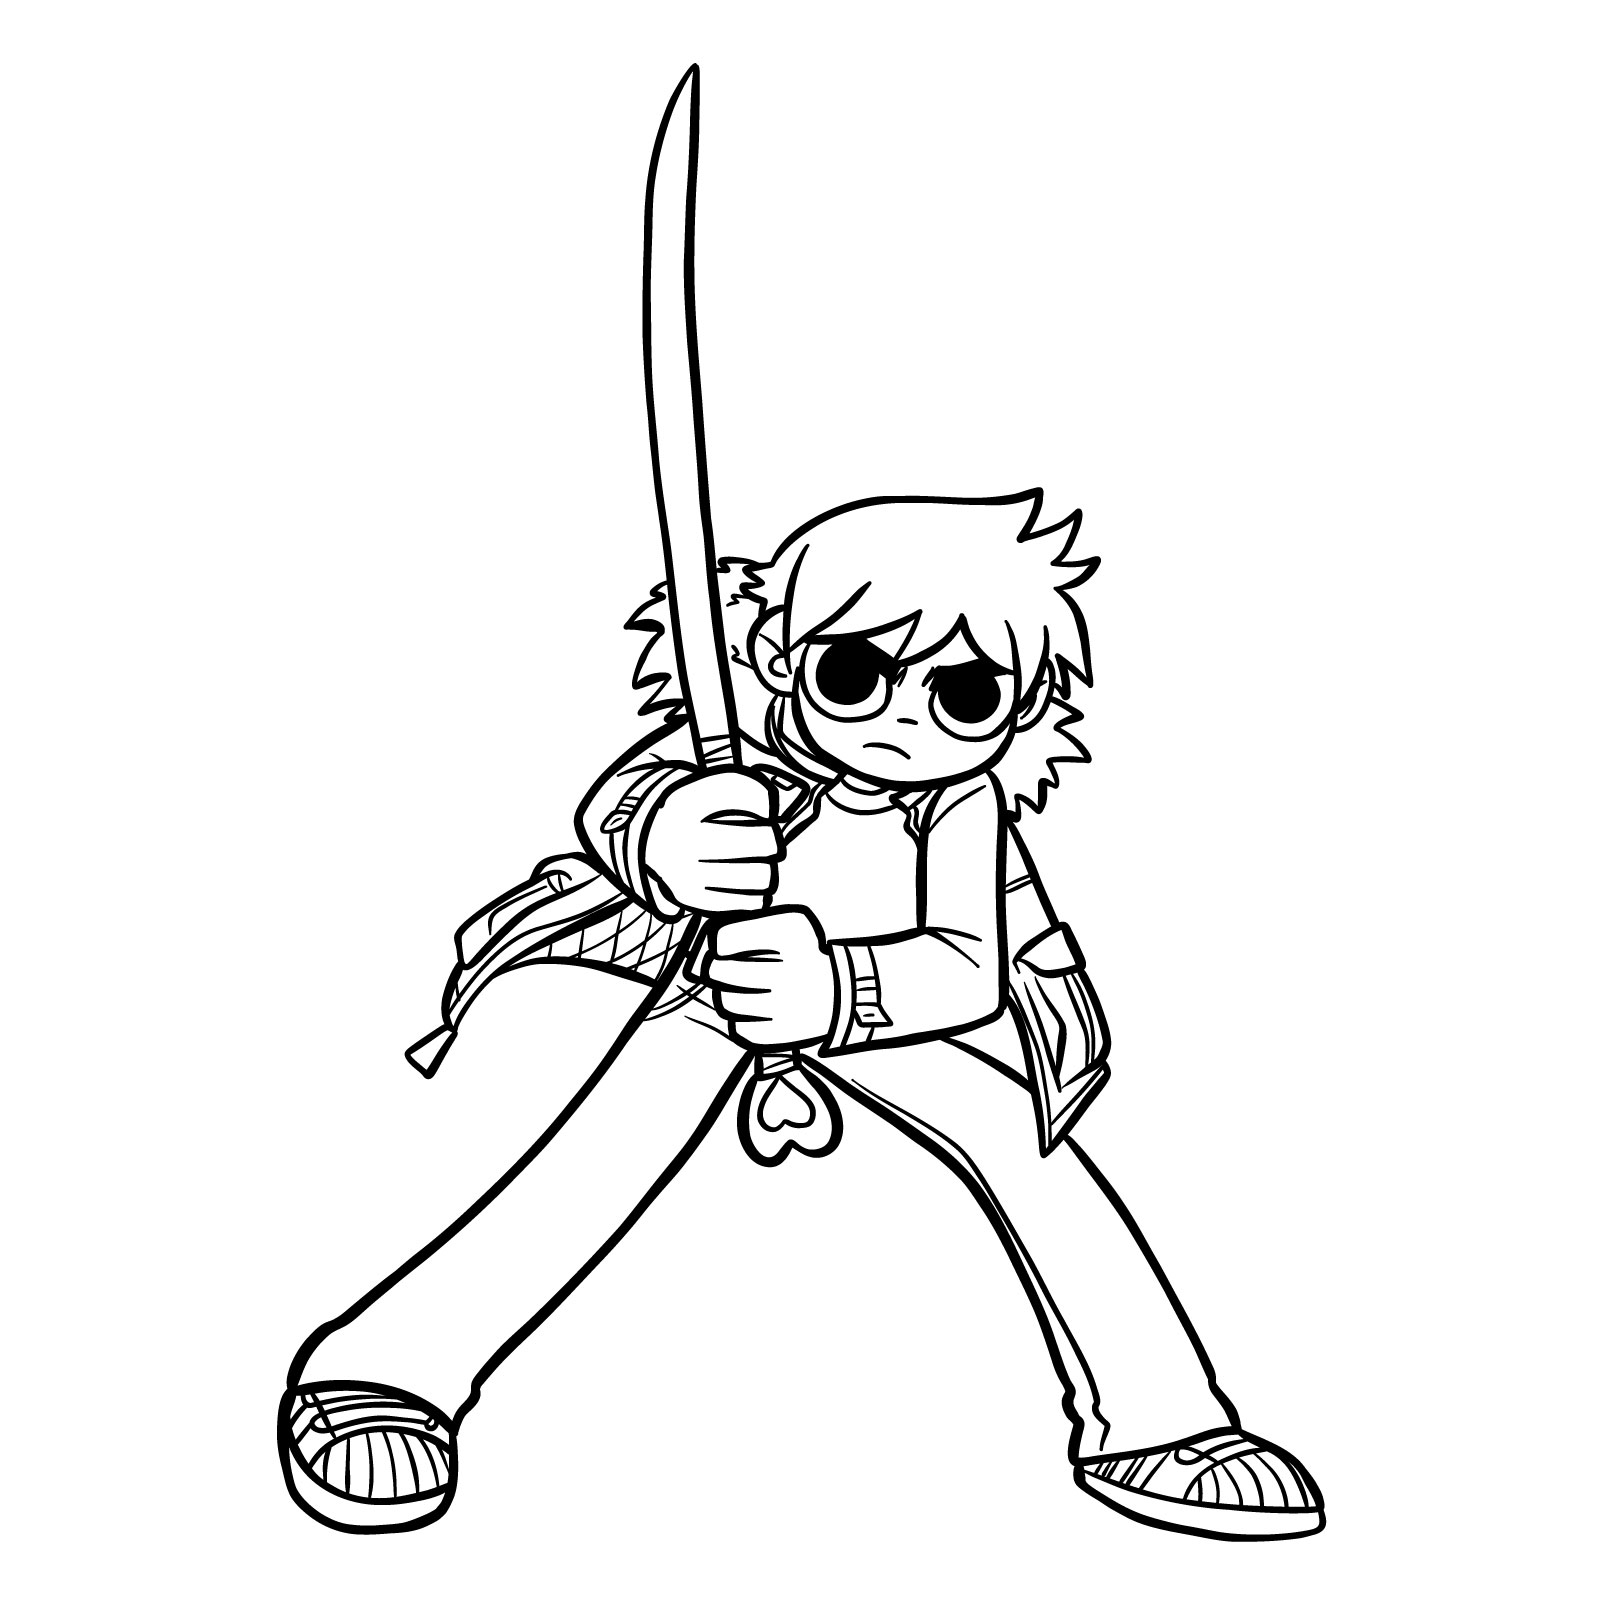 Easy drawing of Scott Pilgrim with The Power of Love - finished drawing